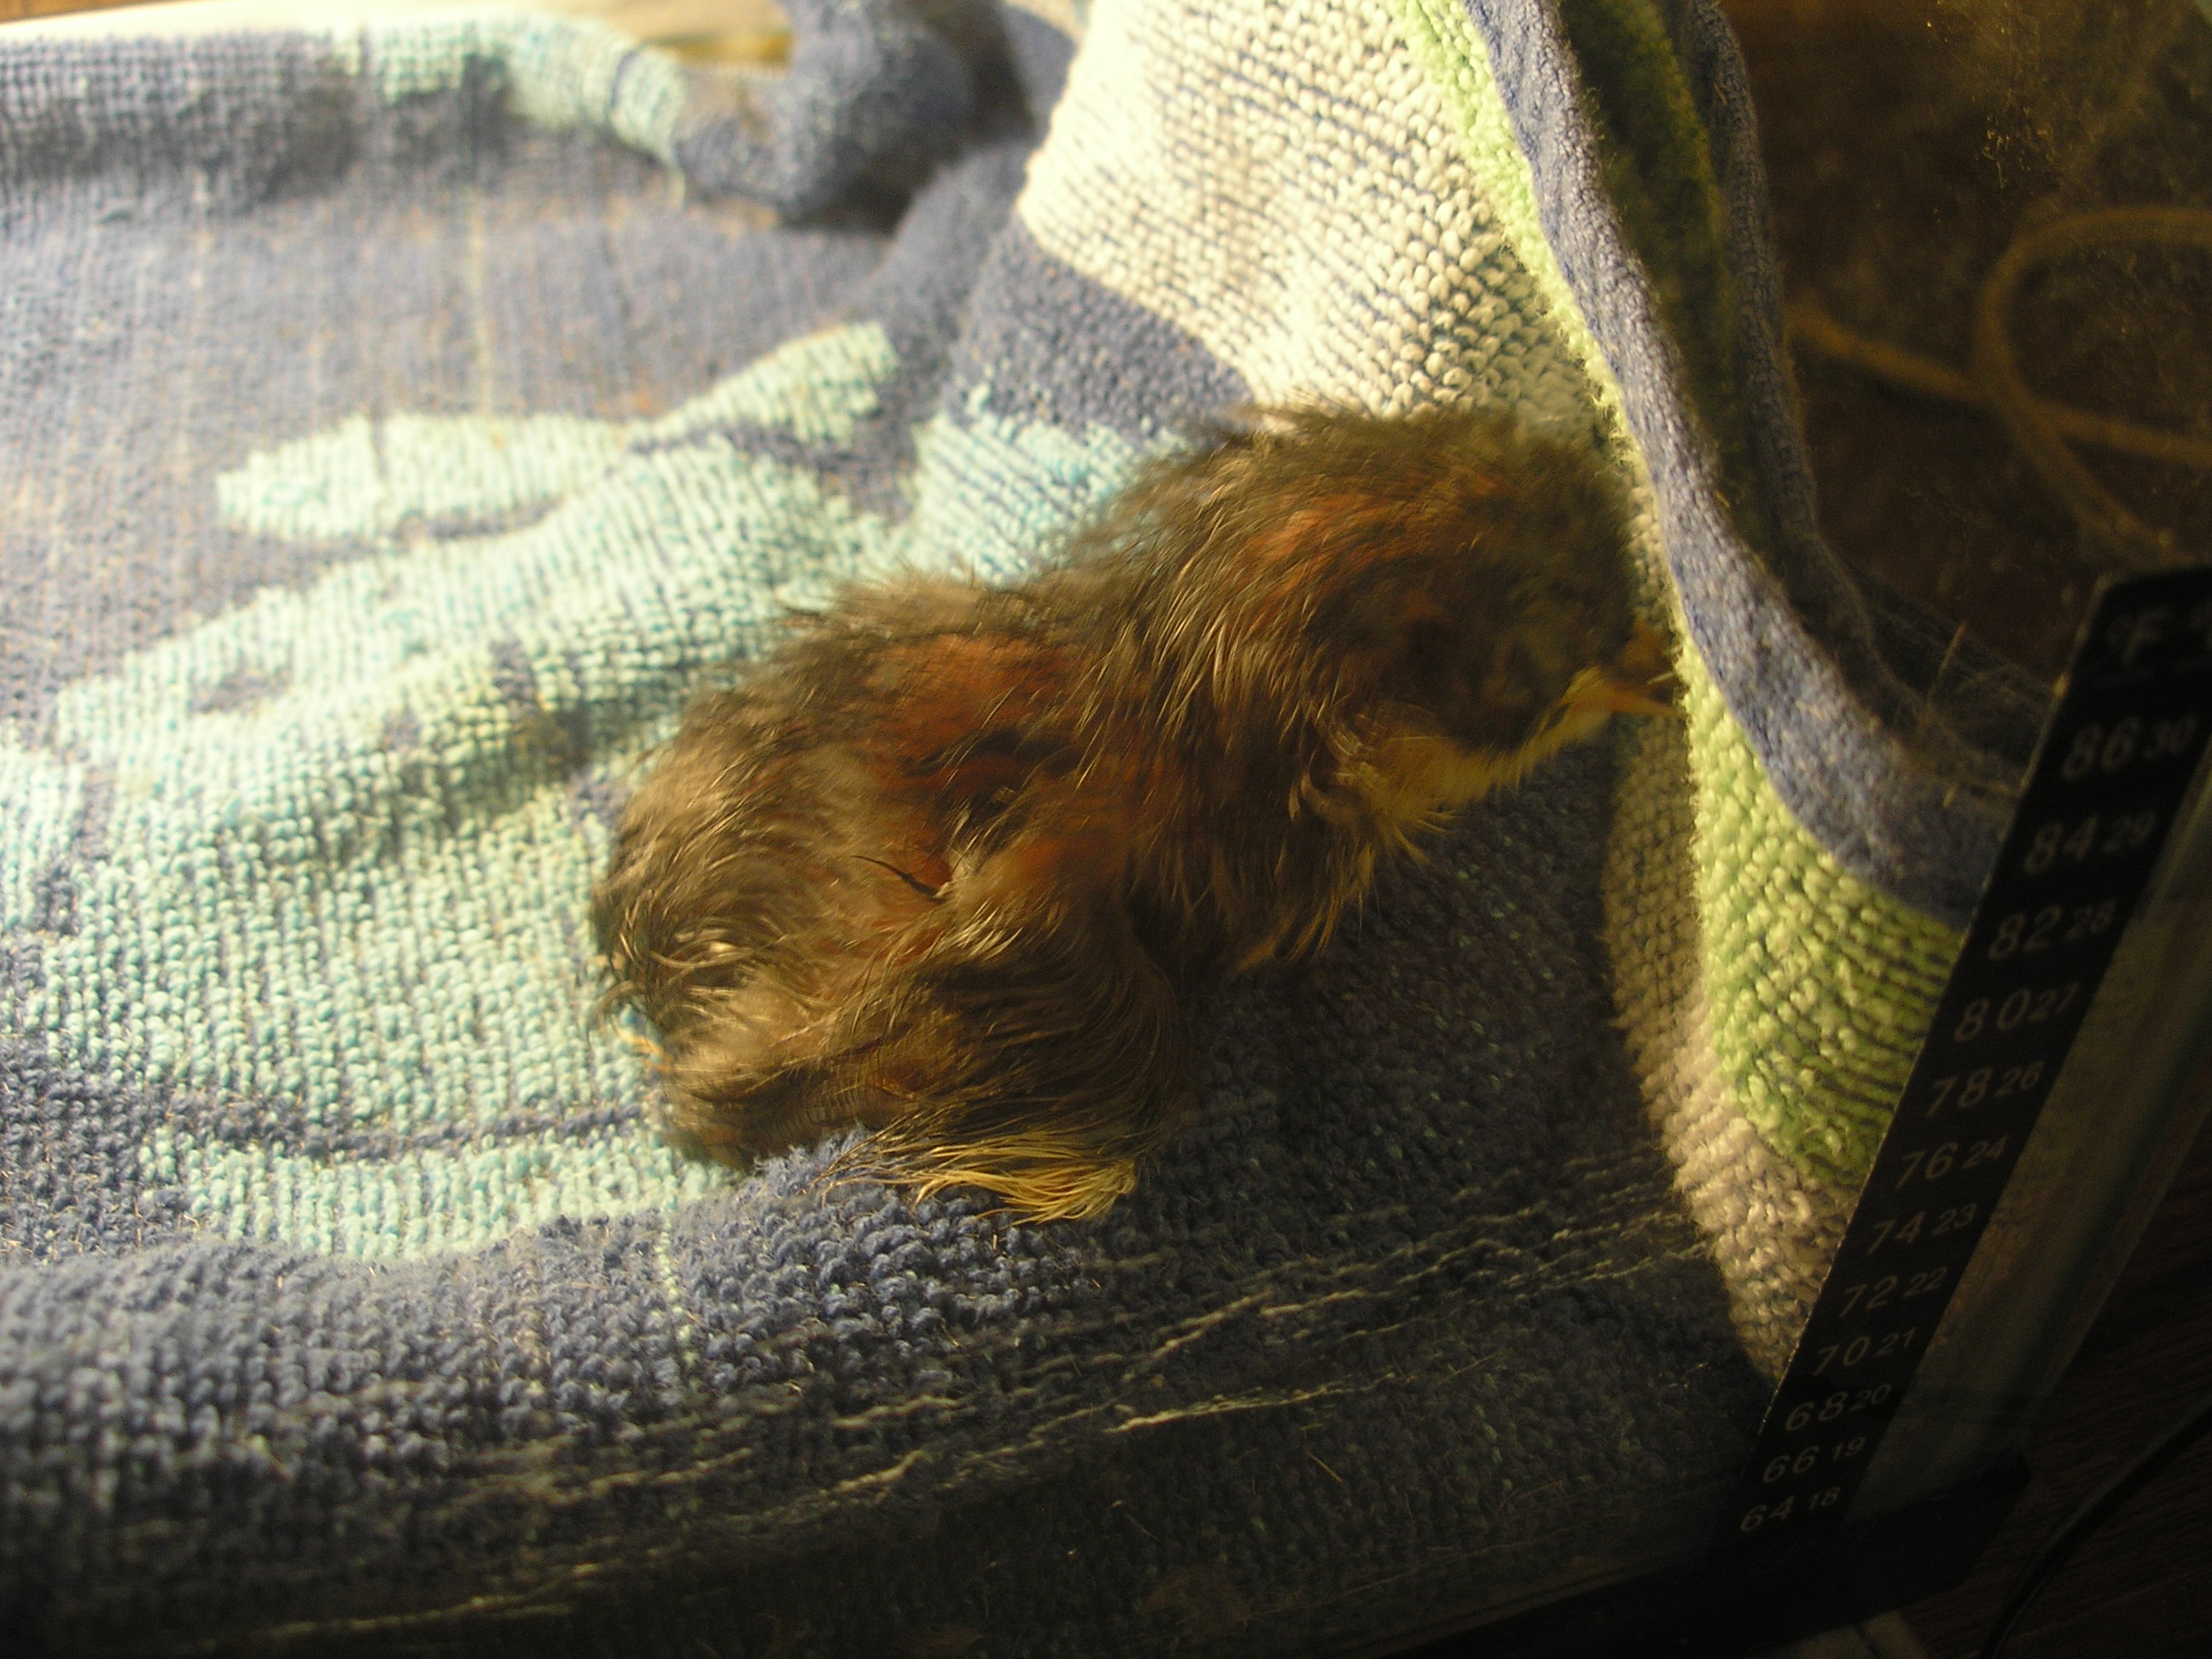 This is # 5 of 18 babies to hatch this is a chocolate baby still wet very cool baby yay got a chocolate!!!!!!!!!!!!!!!!!!!!!